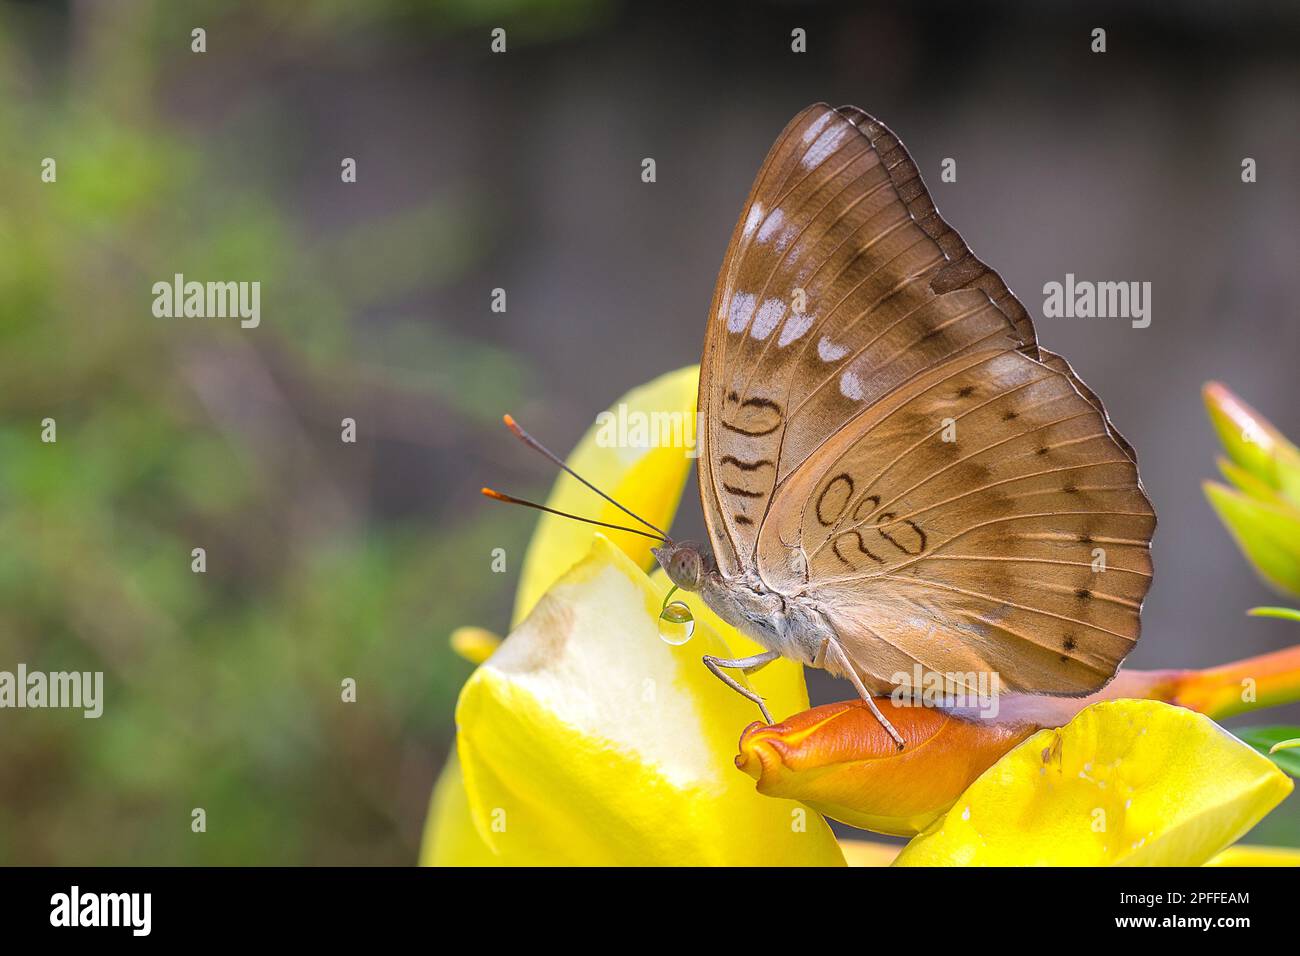 Close up of common baron butterfly, Euthalia aconthea, drinking water Stock Photo